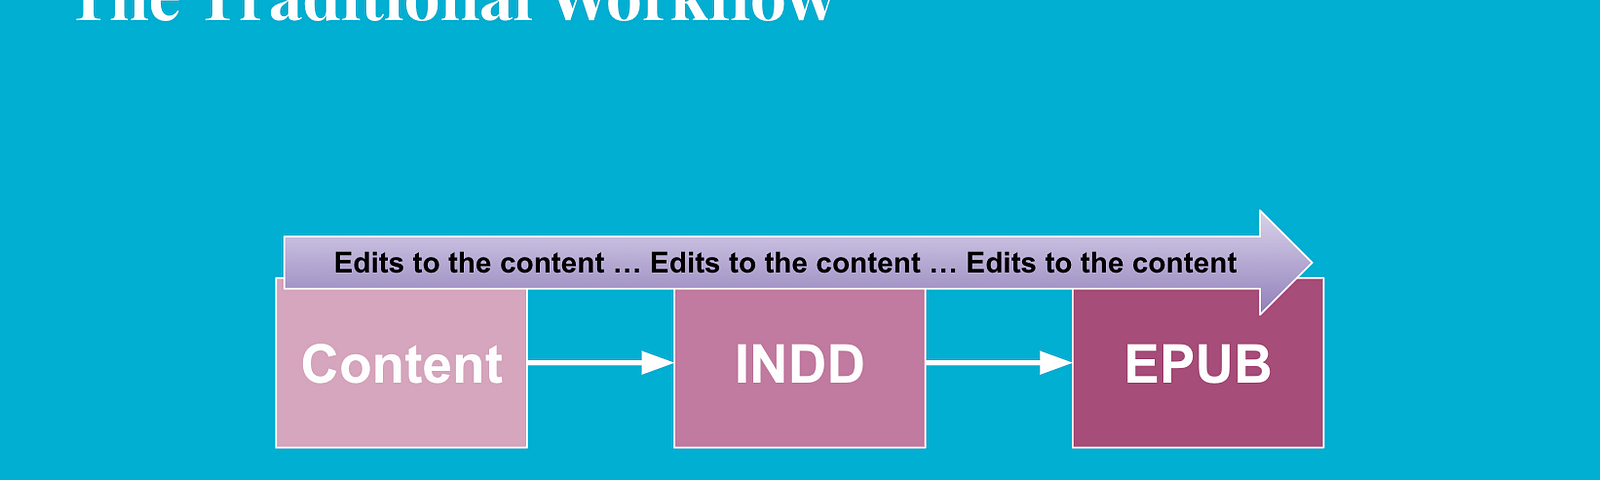 A flowchart with 3 blocks connected by arrows: content > INDD > EPUB; along the top, the three blocks are connected by a long arrow that reads ‘Edits to the content’.